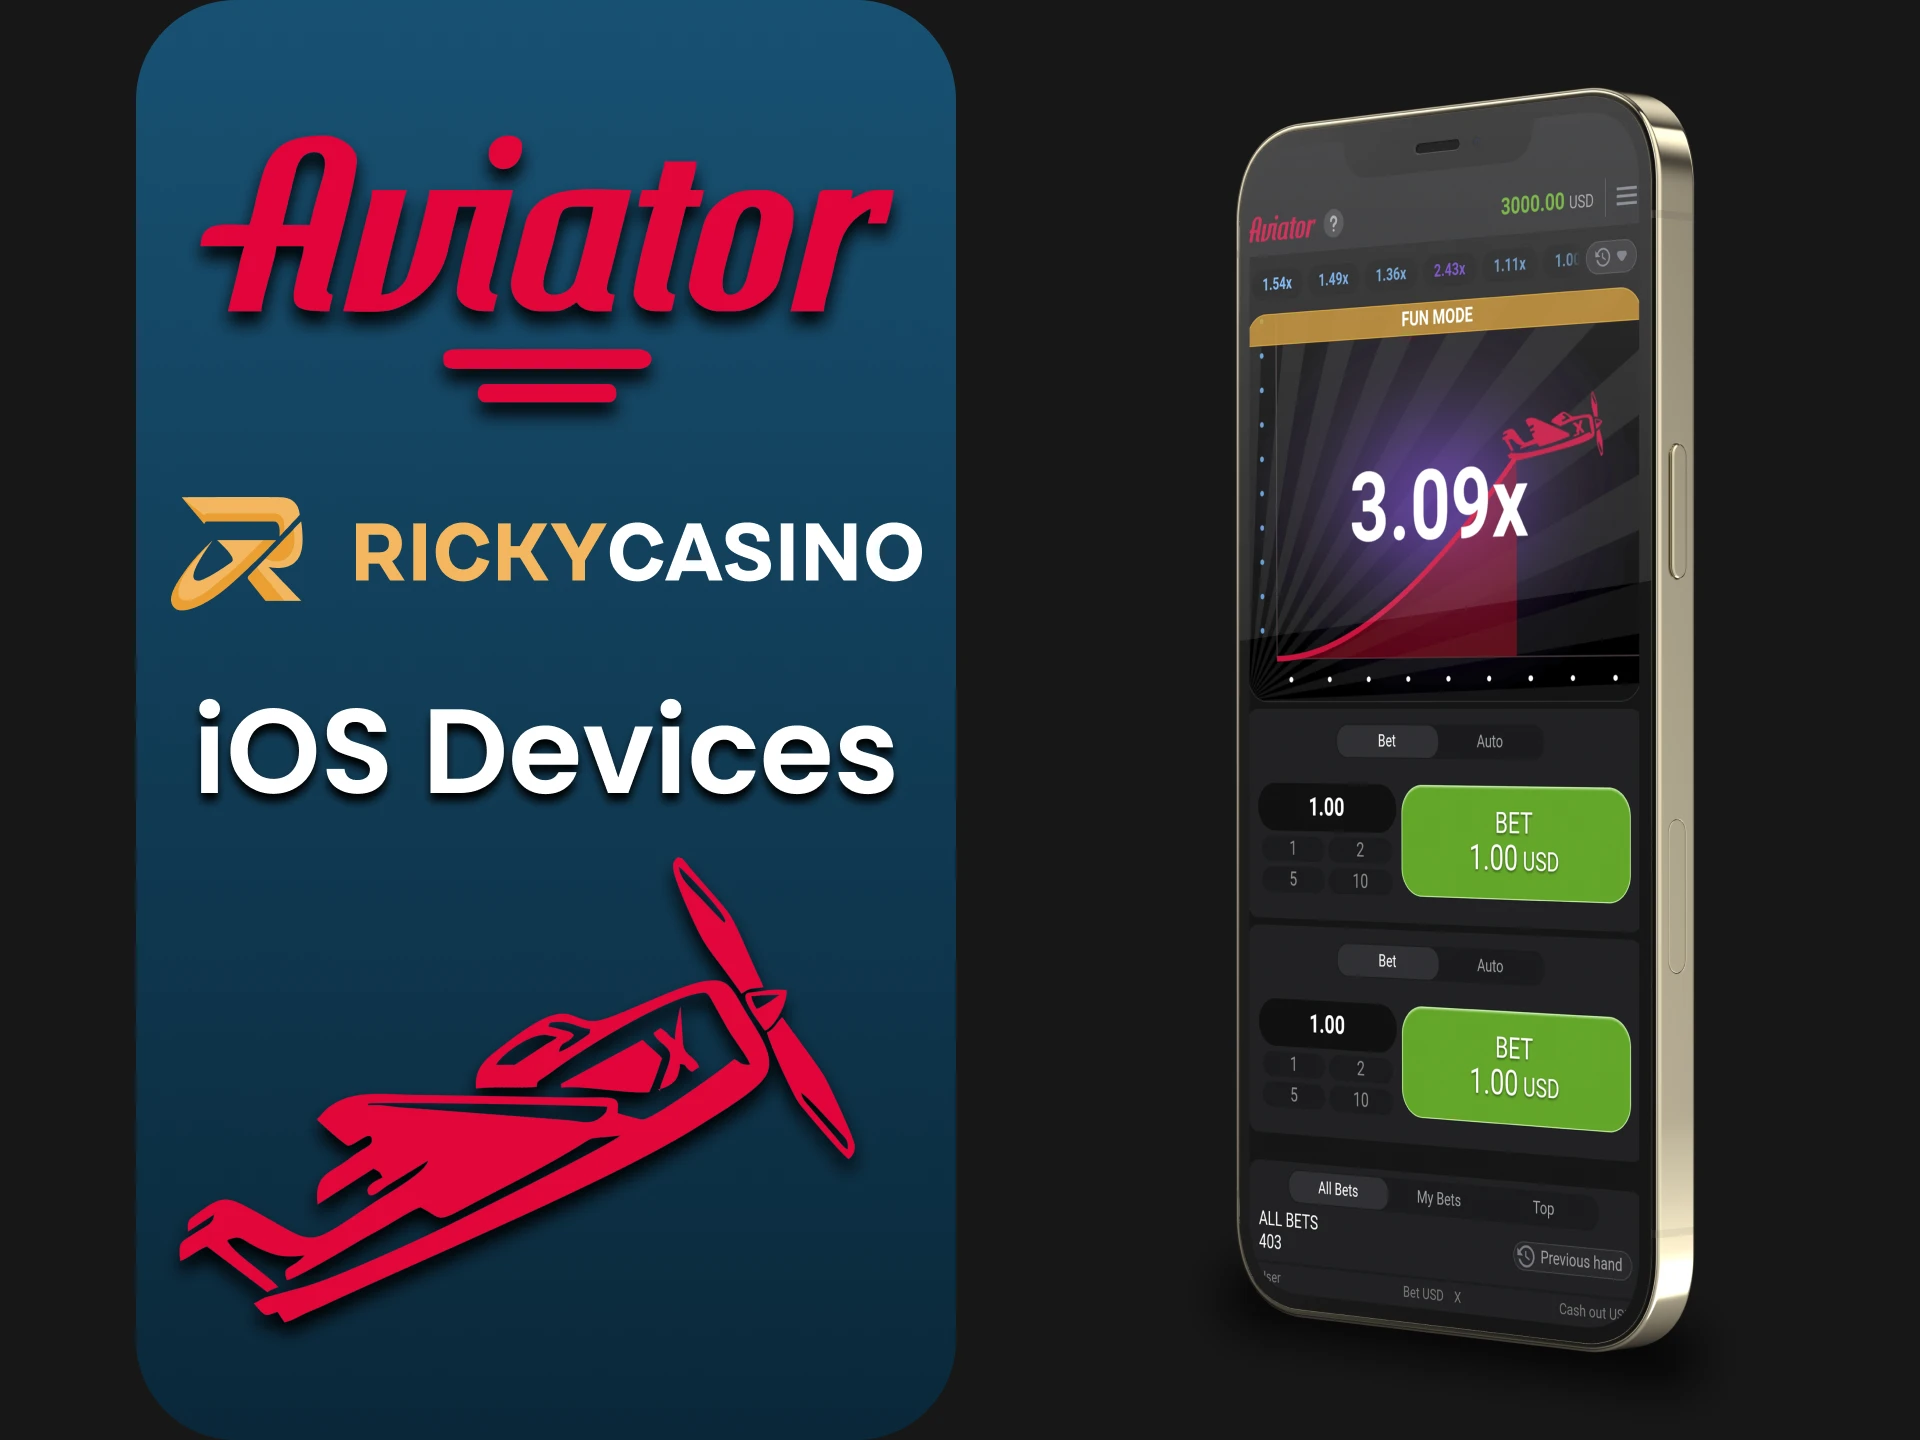 Download the Ricky Casino app to play Aviator on iOS.